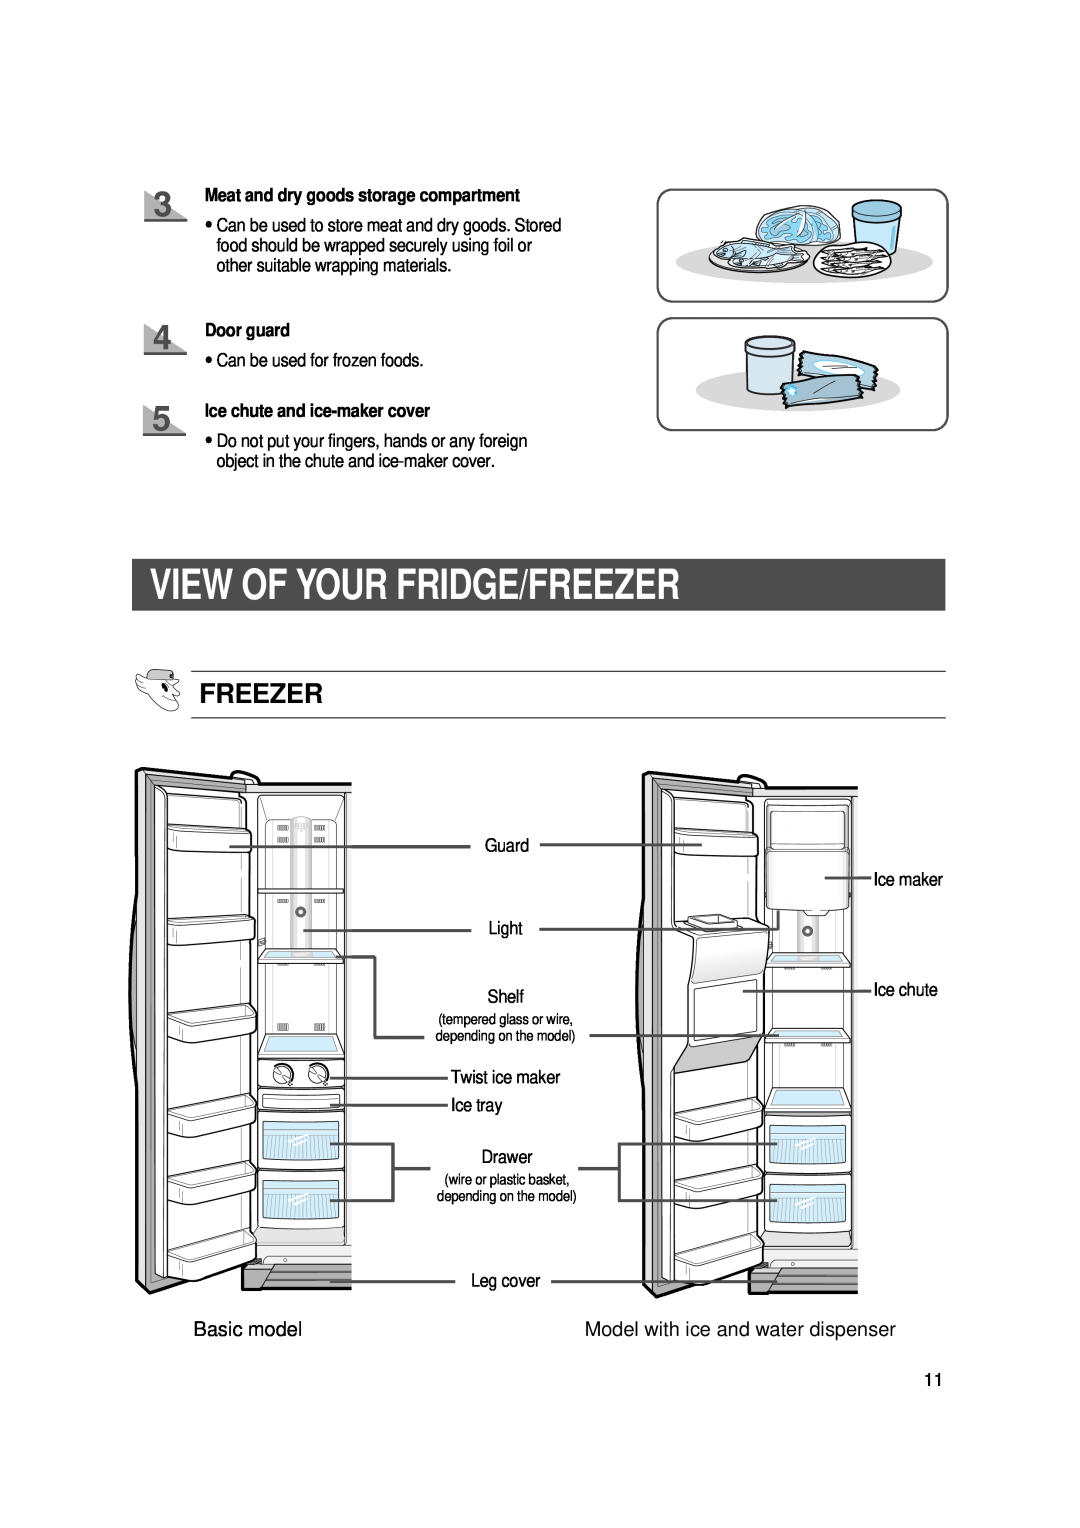 Samsung SR-S20 View Of Your Fridge/Freezer, Meat and dry goods storage compartment, Door guard, Basic model, Guard, Light 